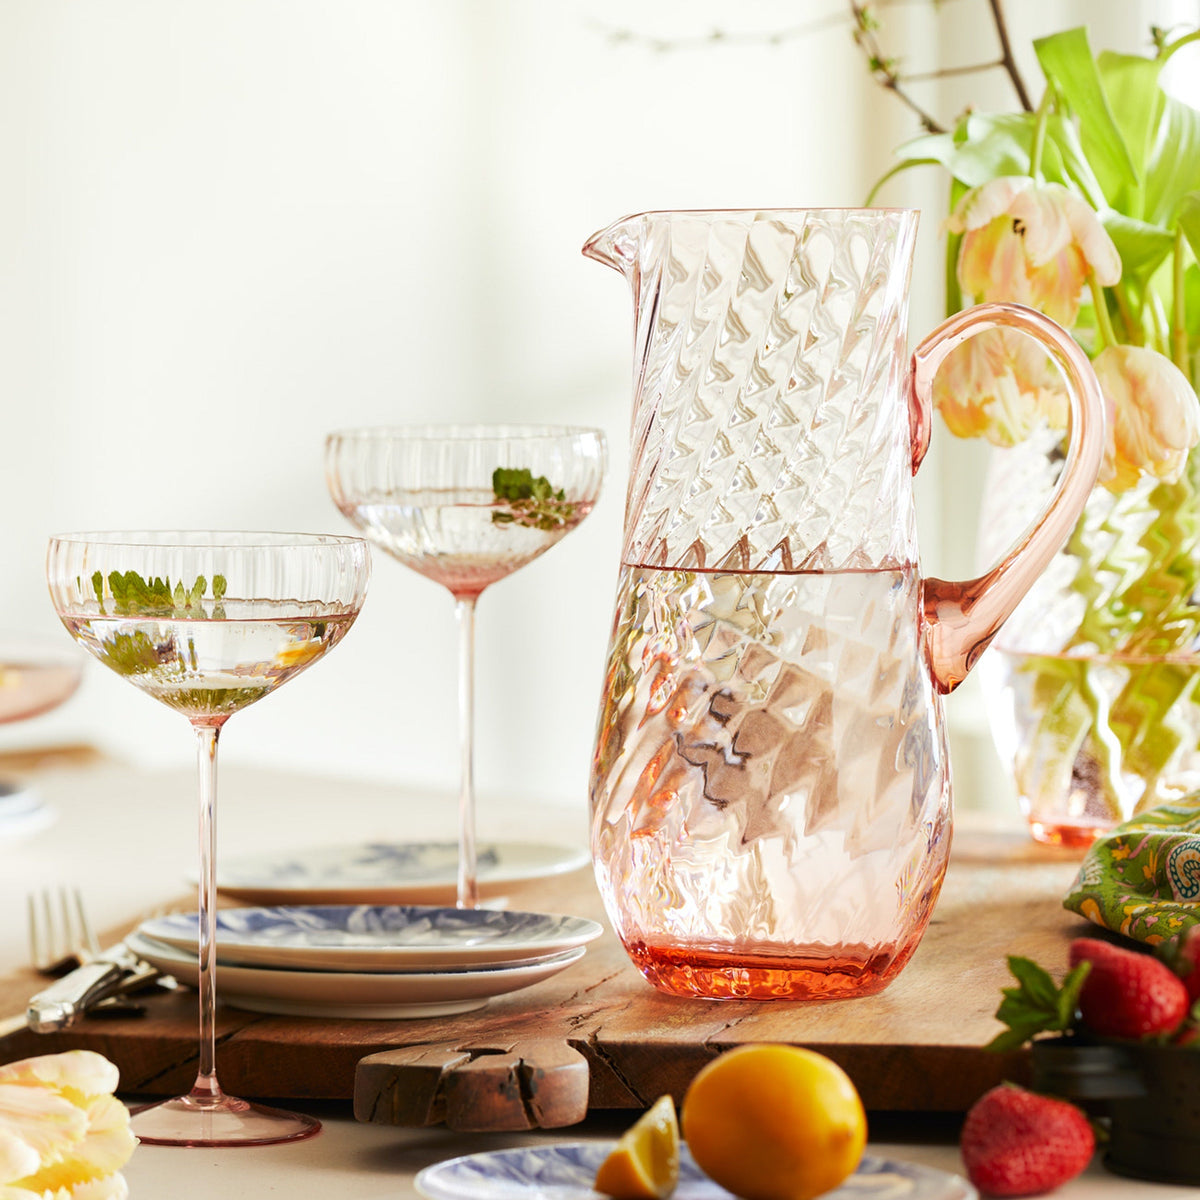 The mouth-blown crystal Quinn Rose Pitcher by Caskata is shown here with a pair of Quinn Rose Coupe Glasses as part of a sunny spring brunch scene.